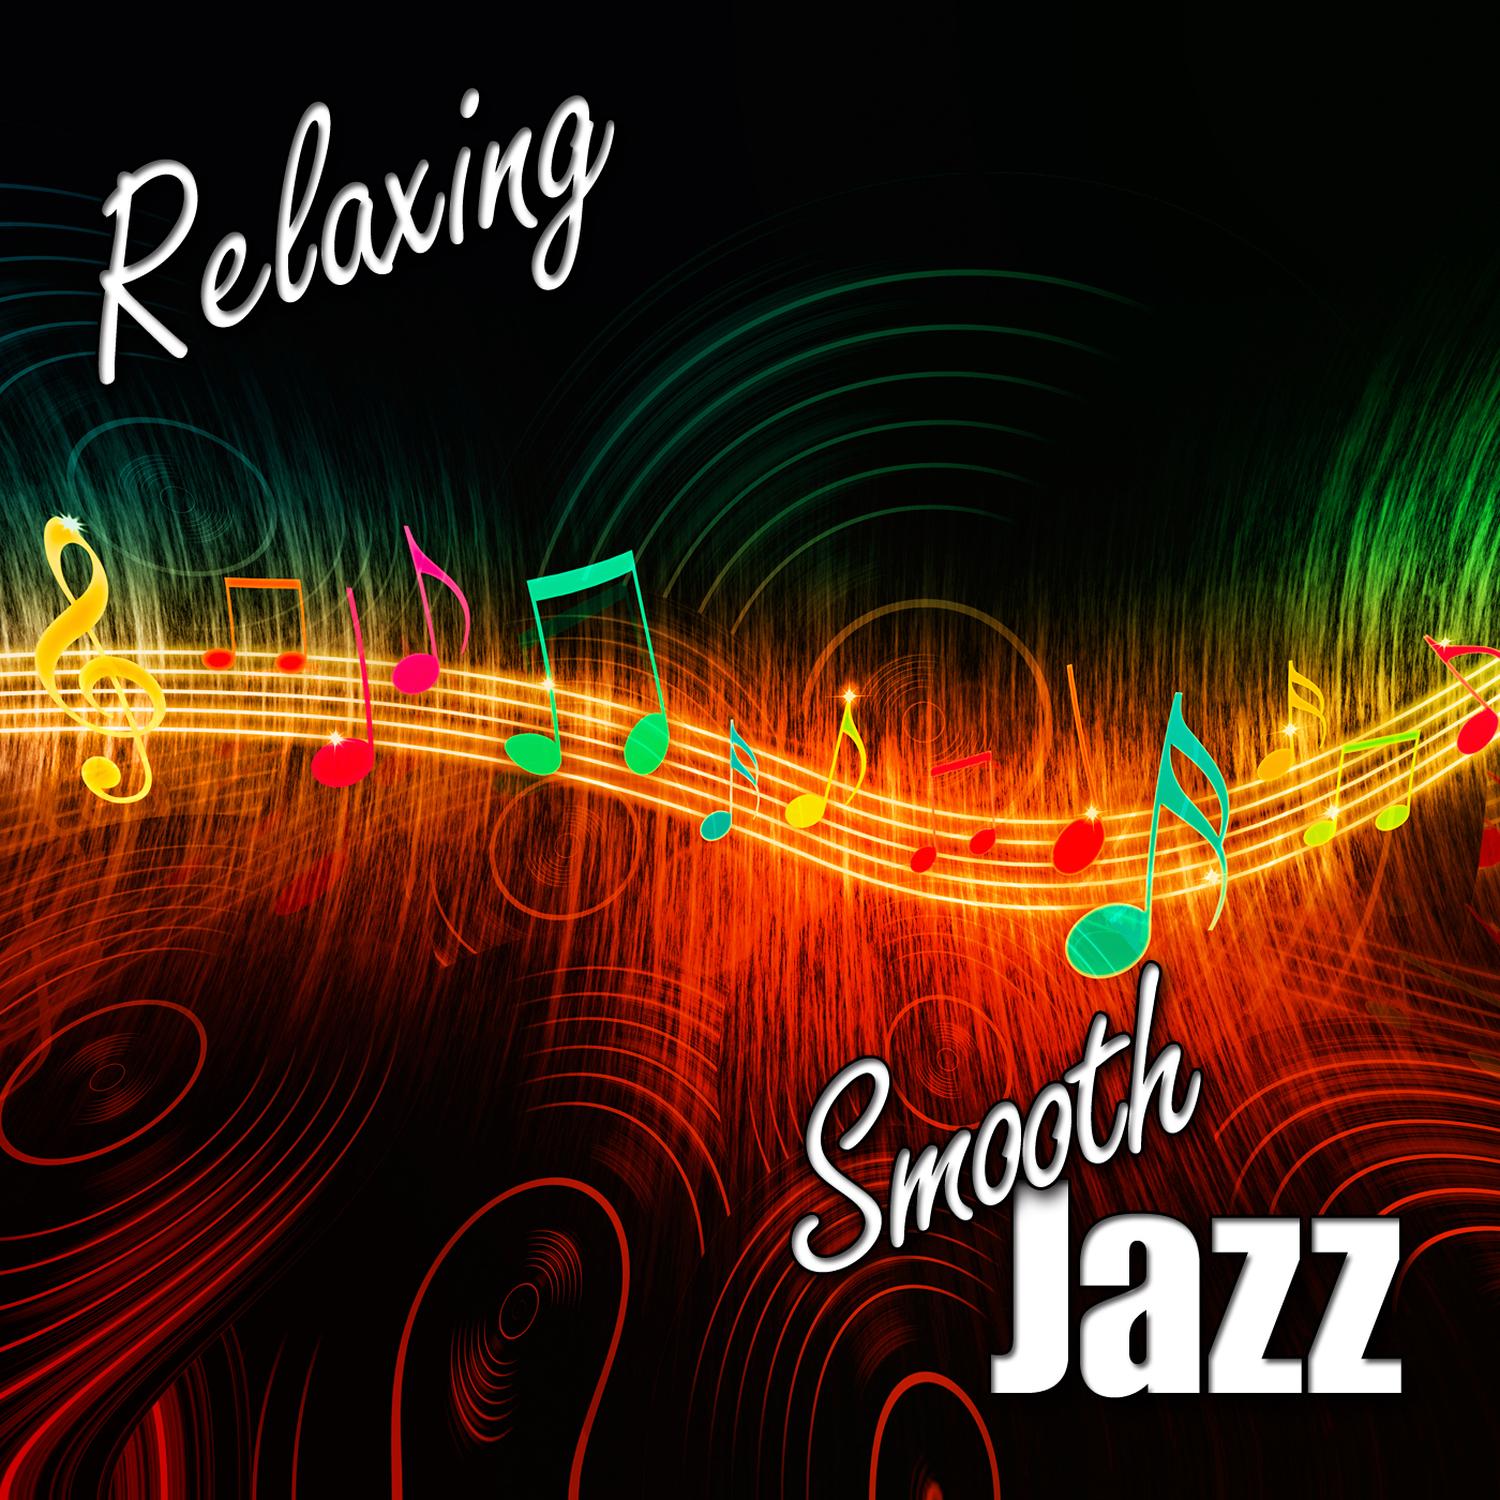 Relaxing: The Smooth Jazz Instrumental That's Easy Listening and Romantic